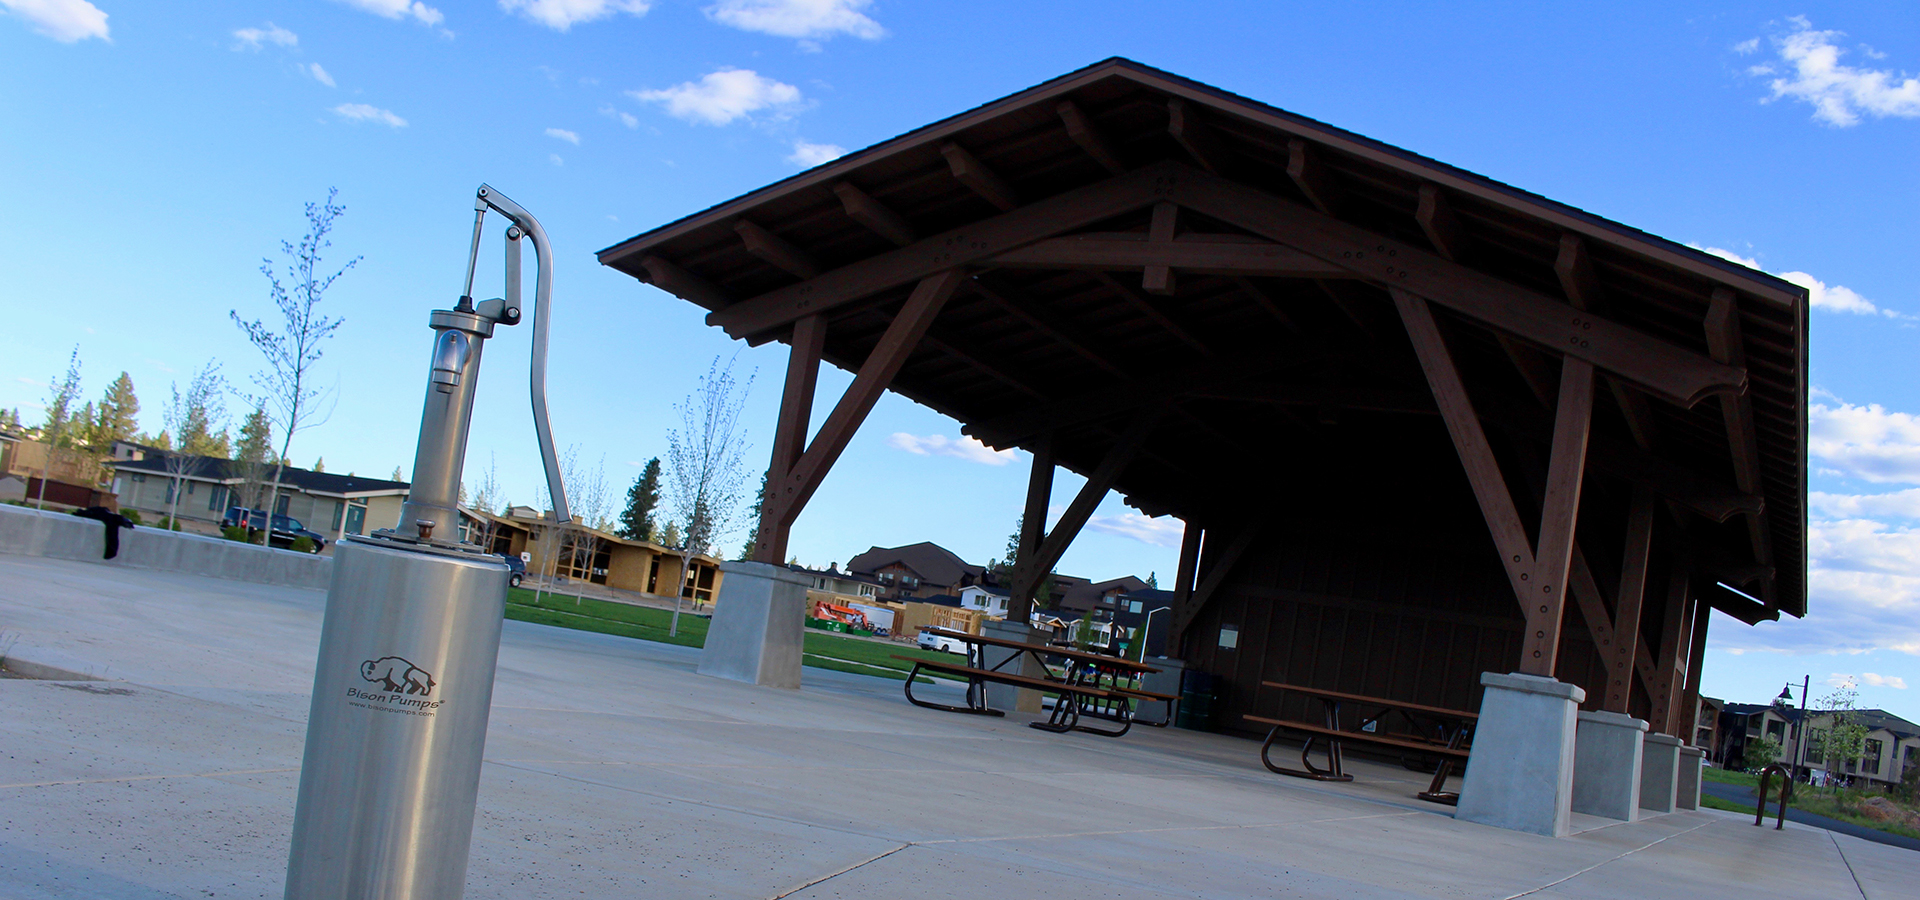 The picnic shelter at Discovery Park.